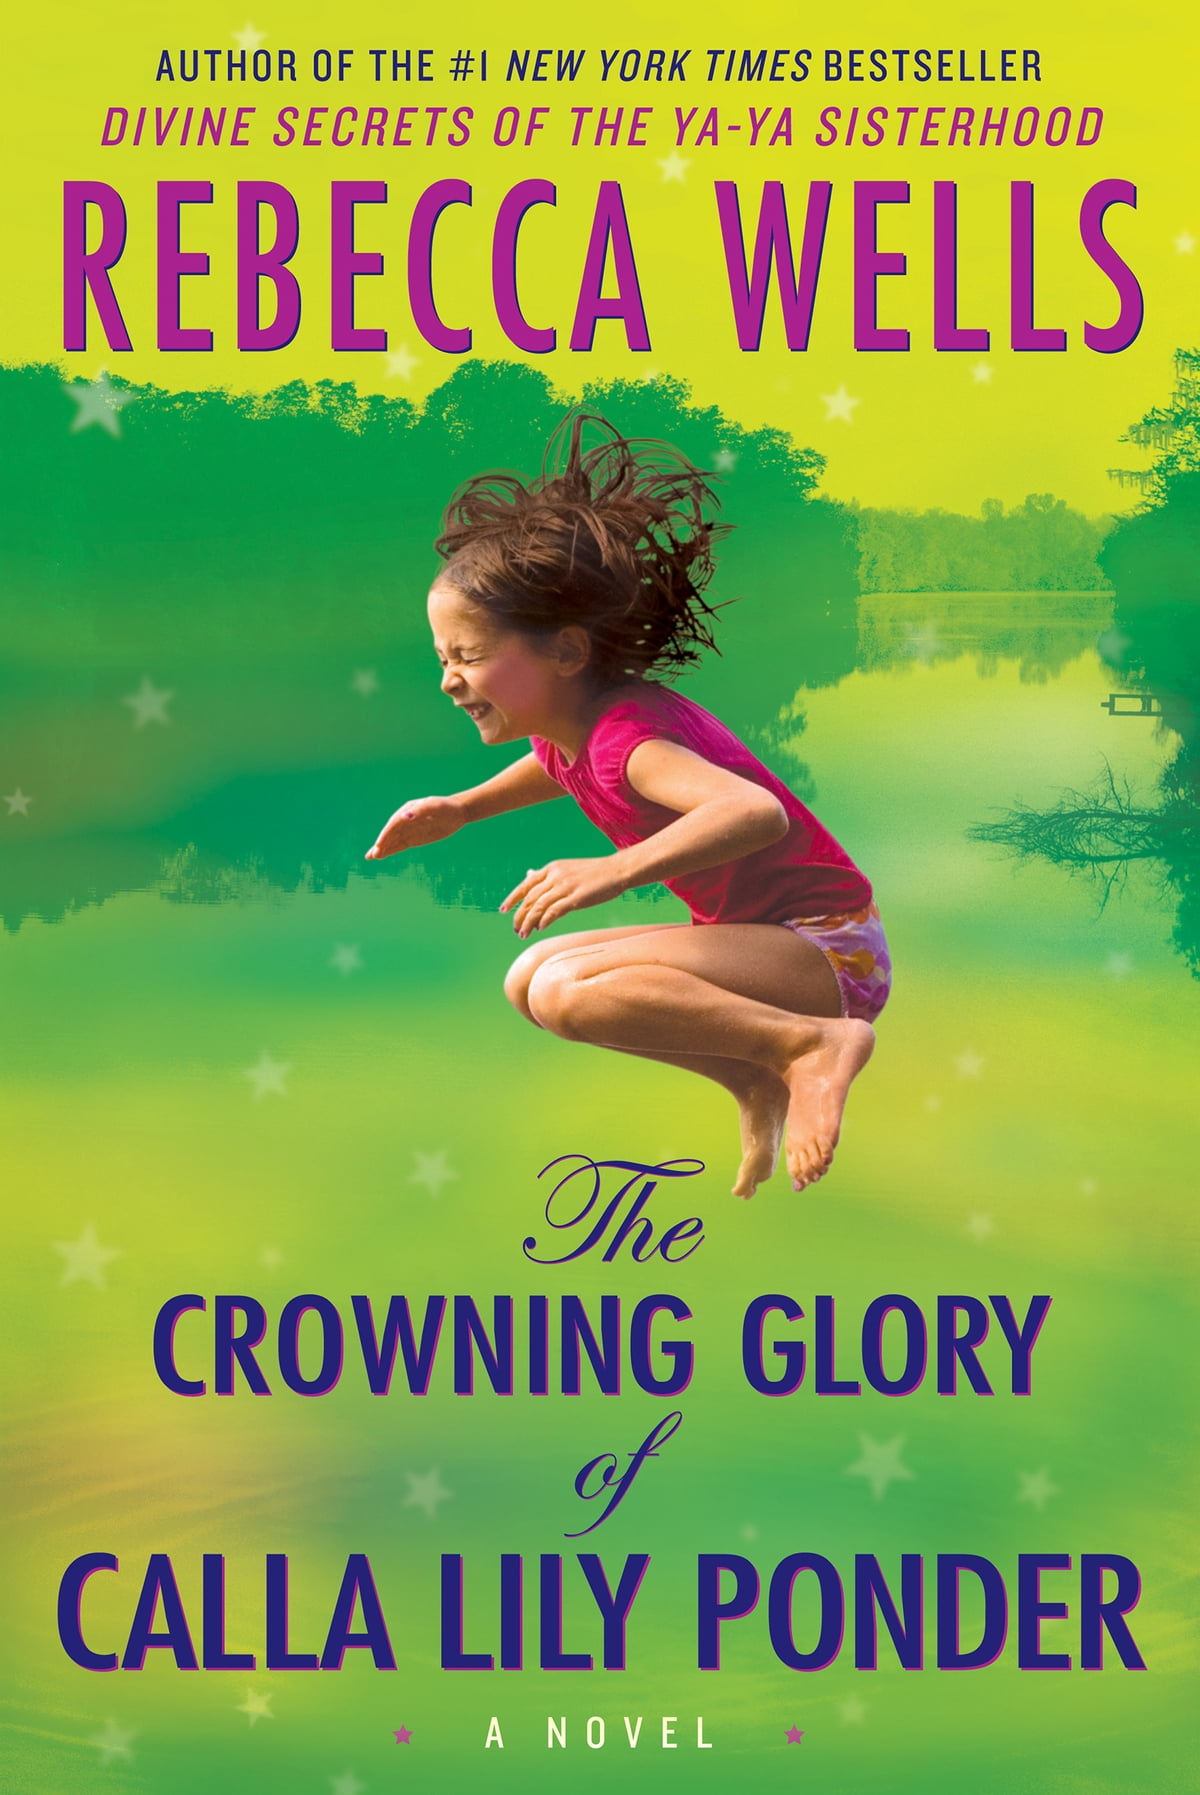 The Crowning Glory of Calla Lily Ponder by Rebecca Wells